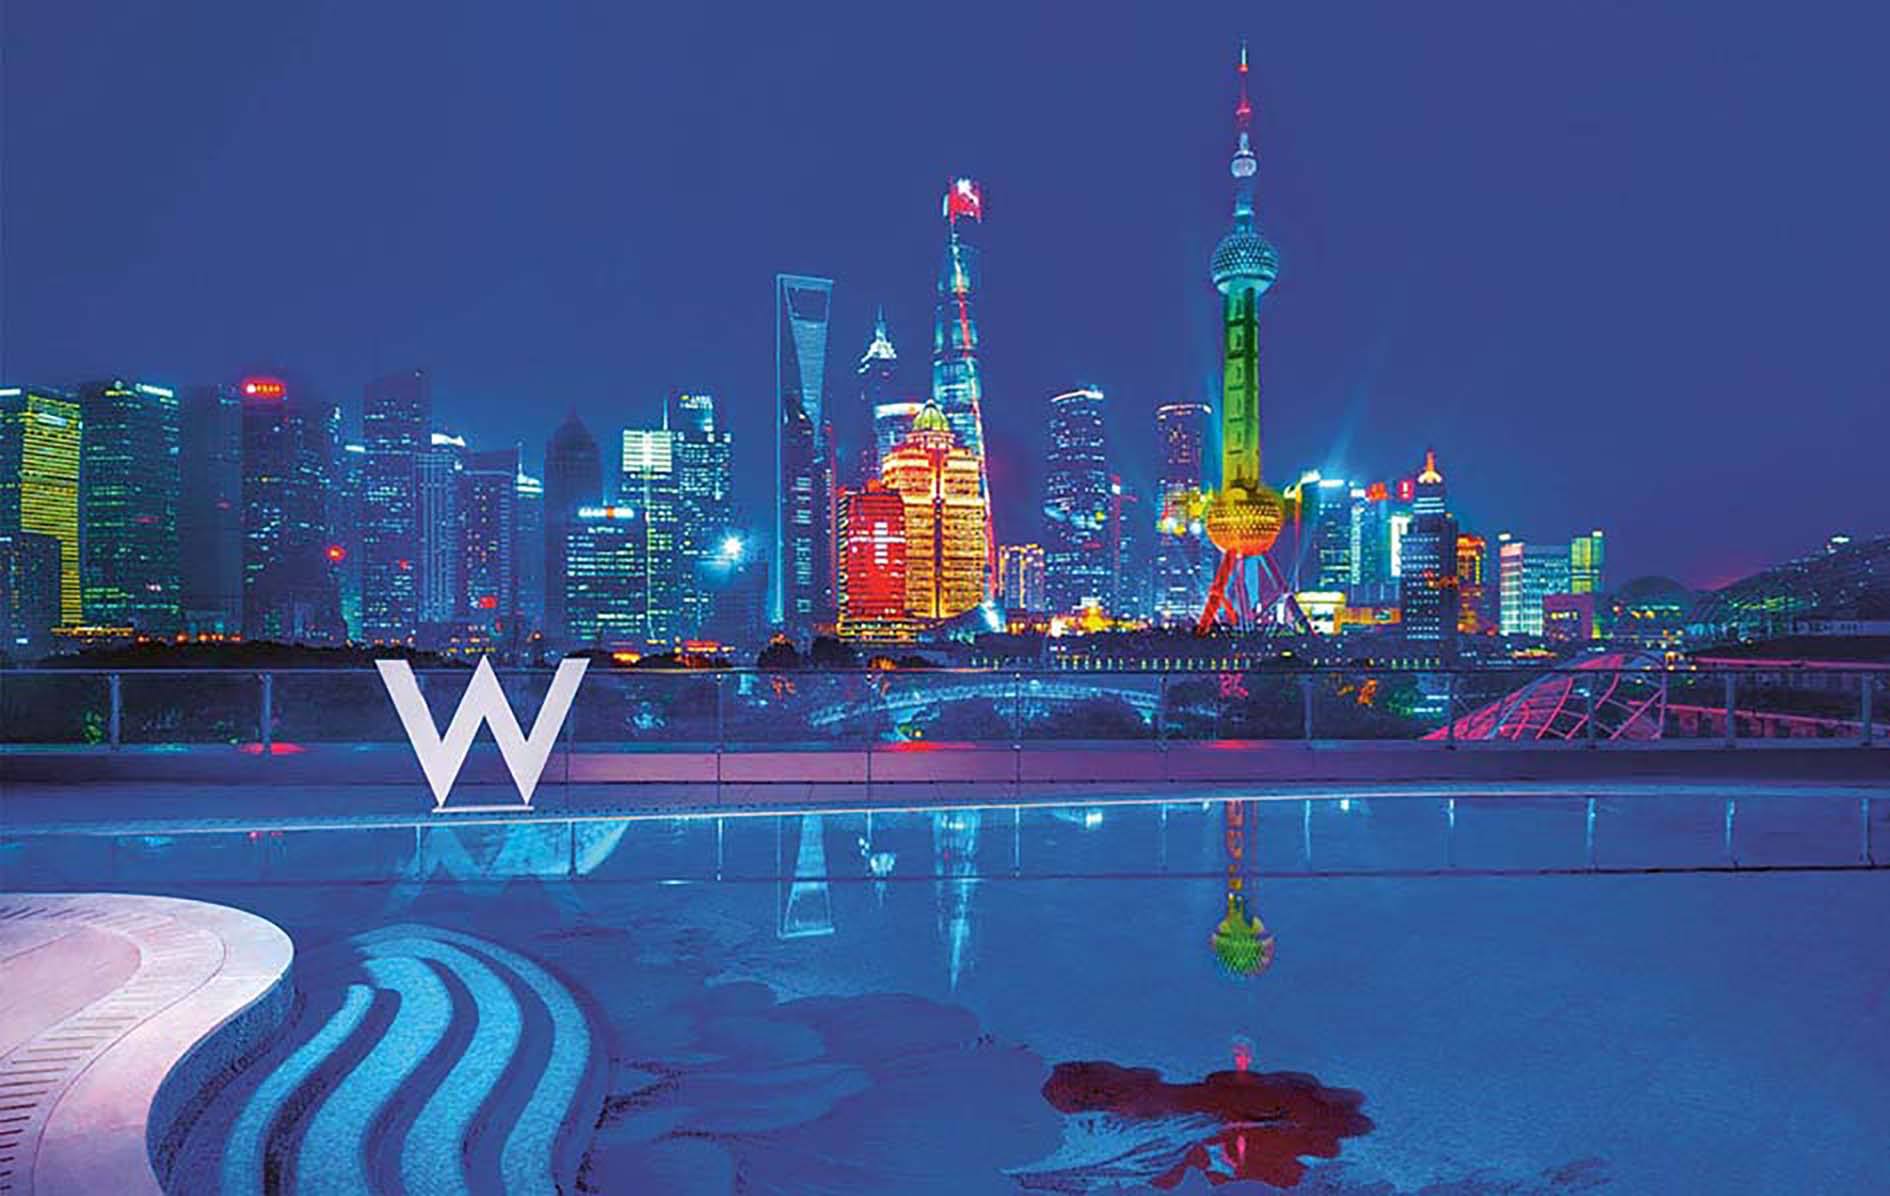 Wet rooftop bar and pool at the W Shanghai with nighttime neon skyline view of Shanghai